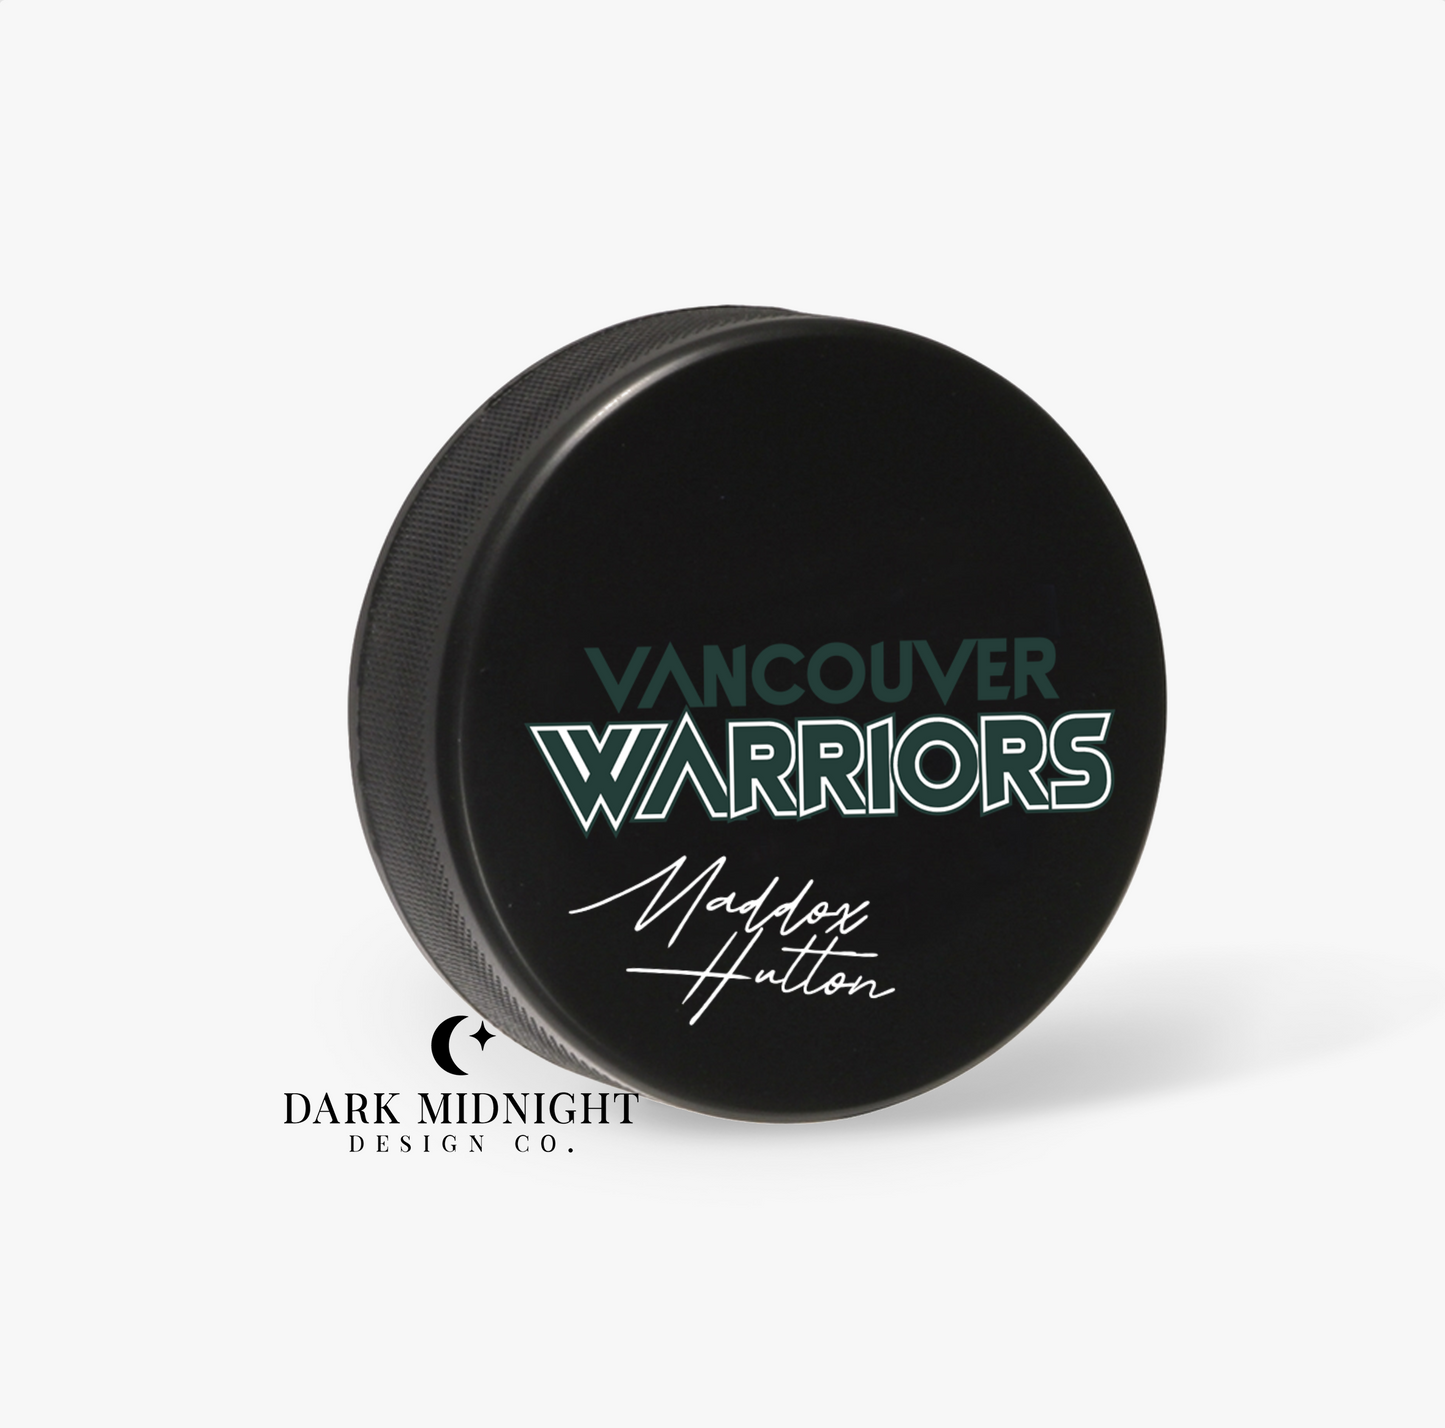 Vancouver Warriors Signed Maddox Hutton Hockey Puck - Officially Licensed Greatest Love Series